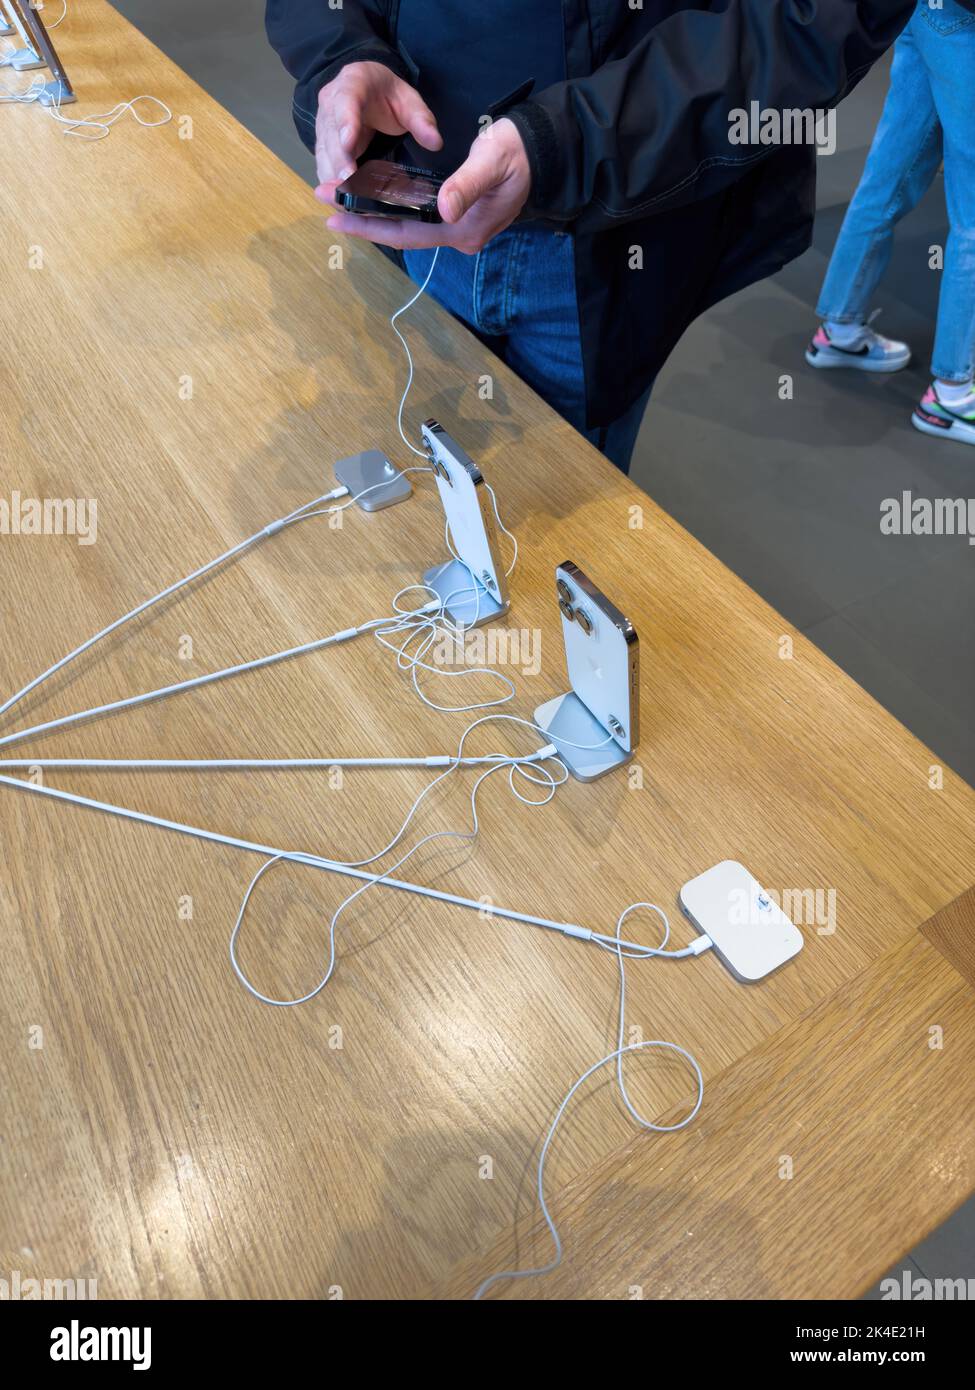 Paris, France - Sep 16, 2022: Man inspecting new phone: The Apple Computers iPhone 14, 14 Pro, Pro Max on sale during the launch day featuring Always-on display, 48-megapixel Main camera and Dynamic Island Stock Photo